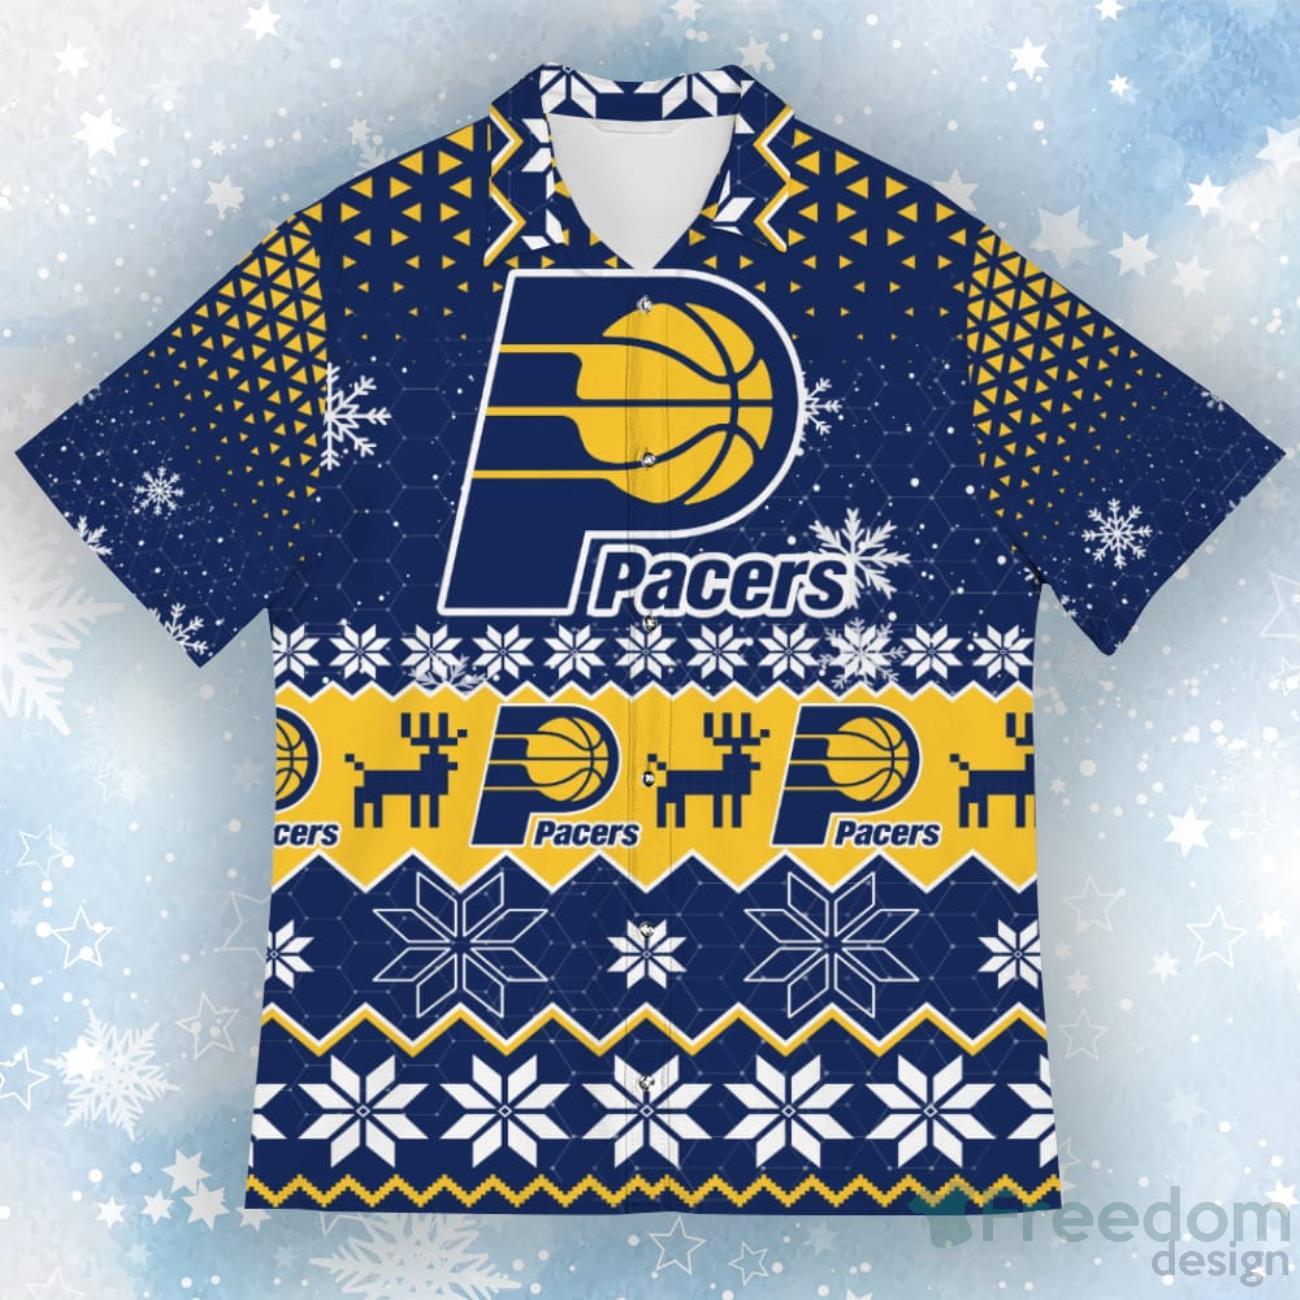 indiana pacers shirt